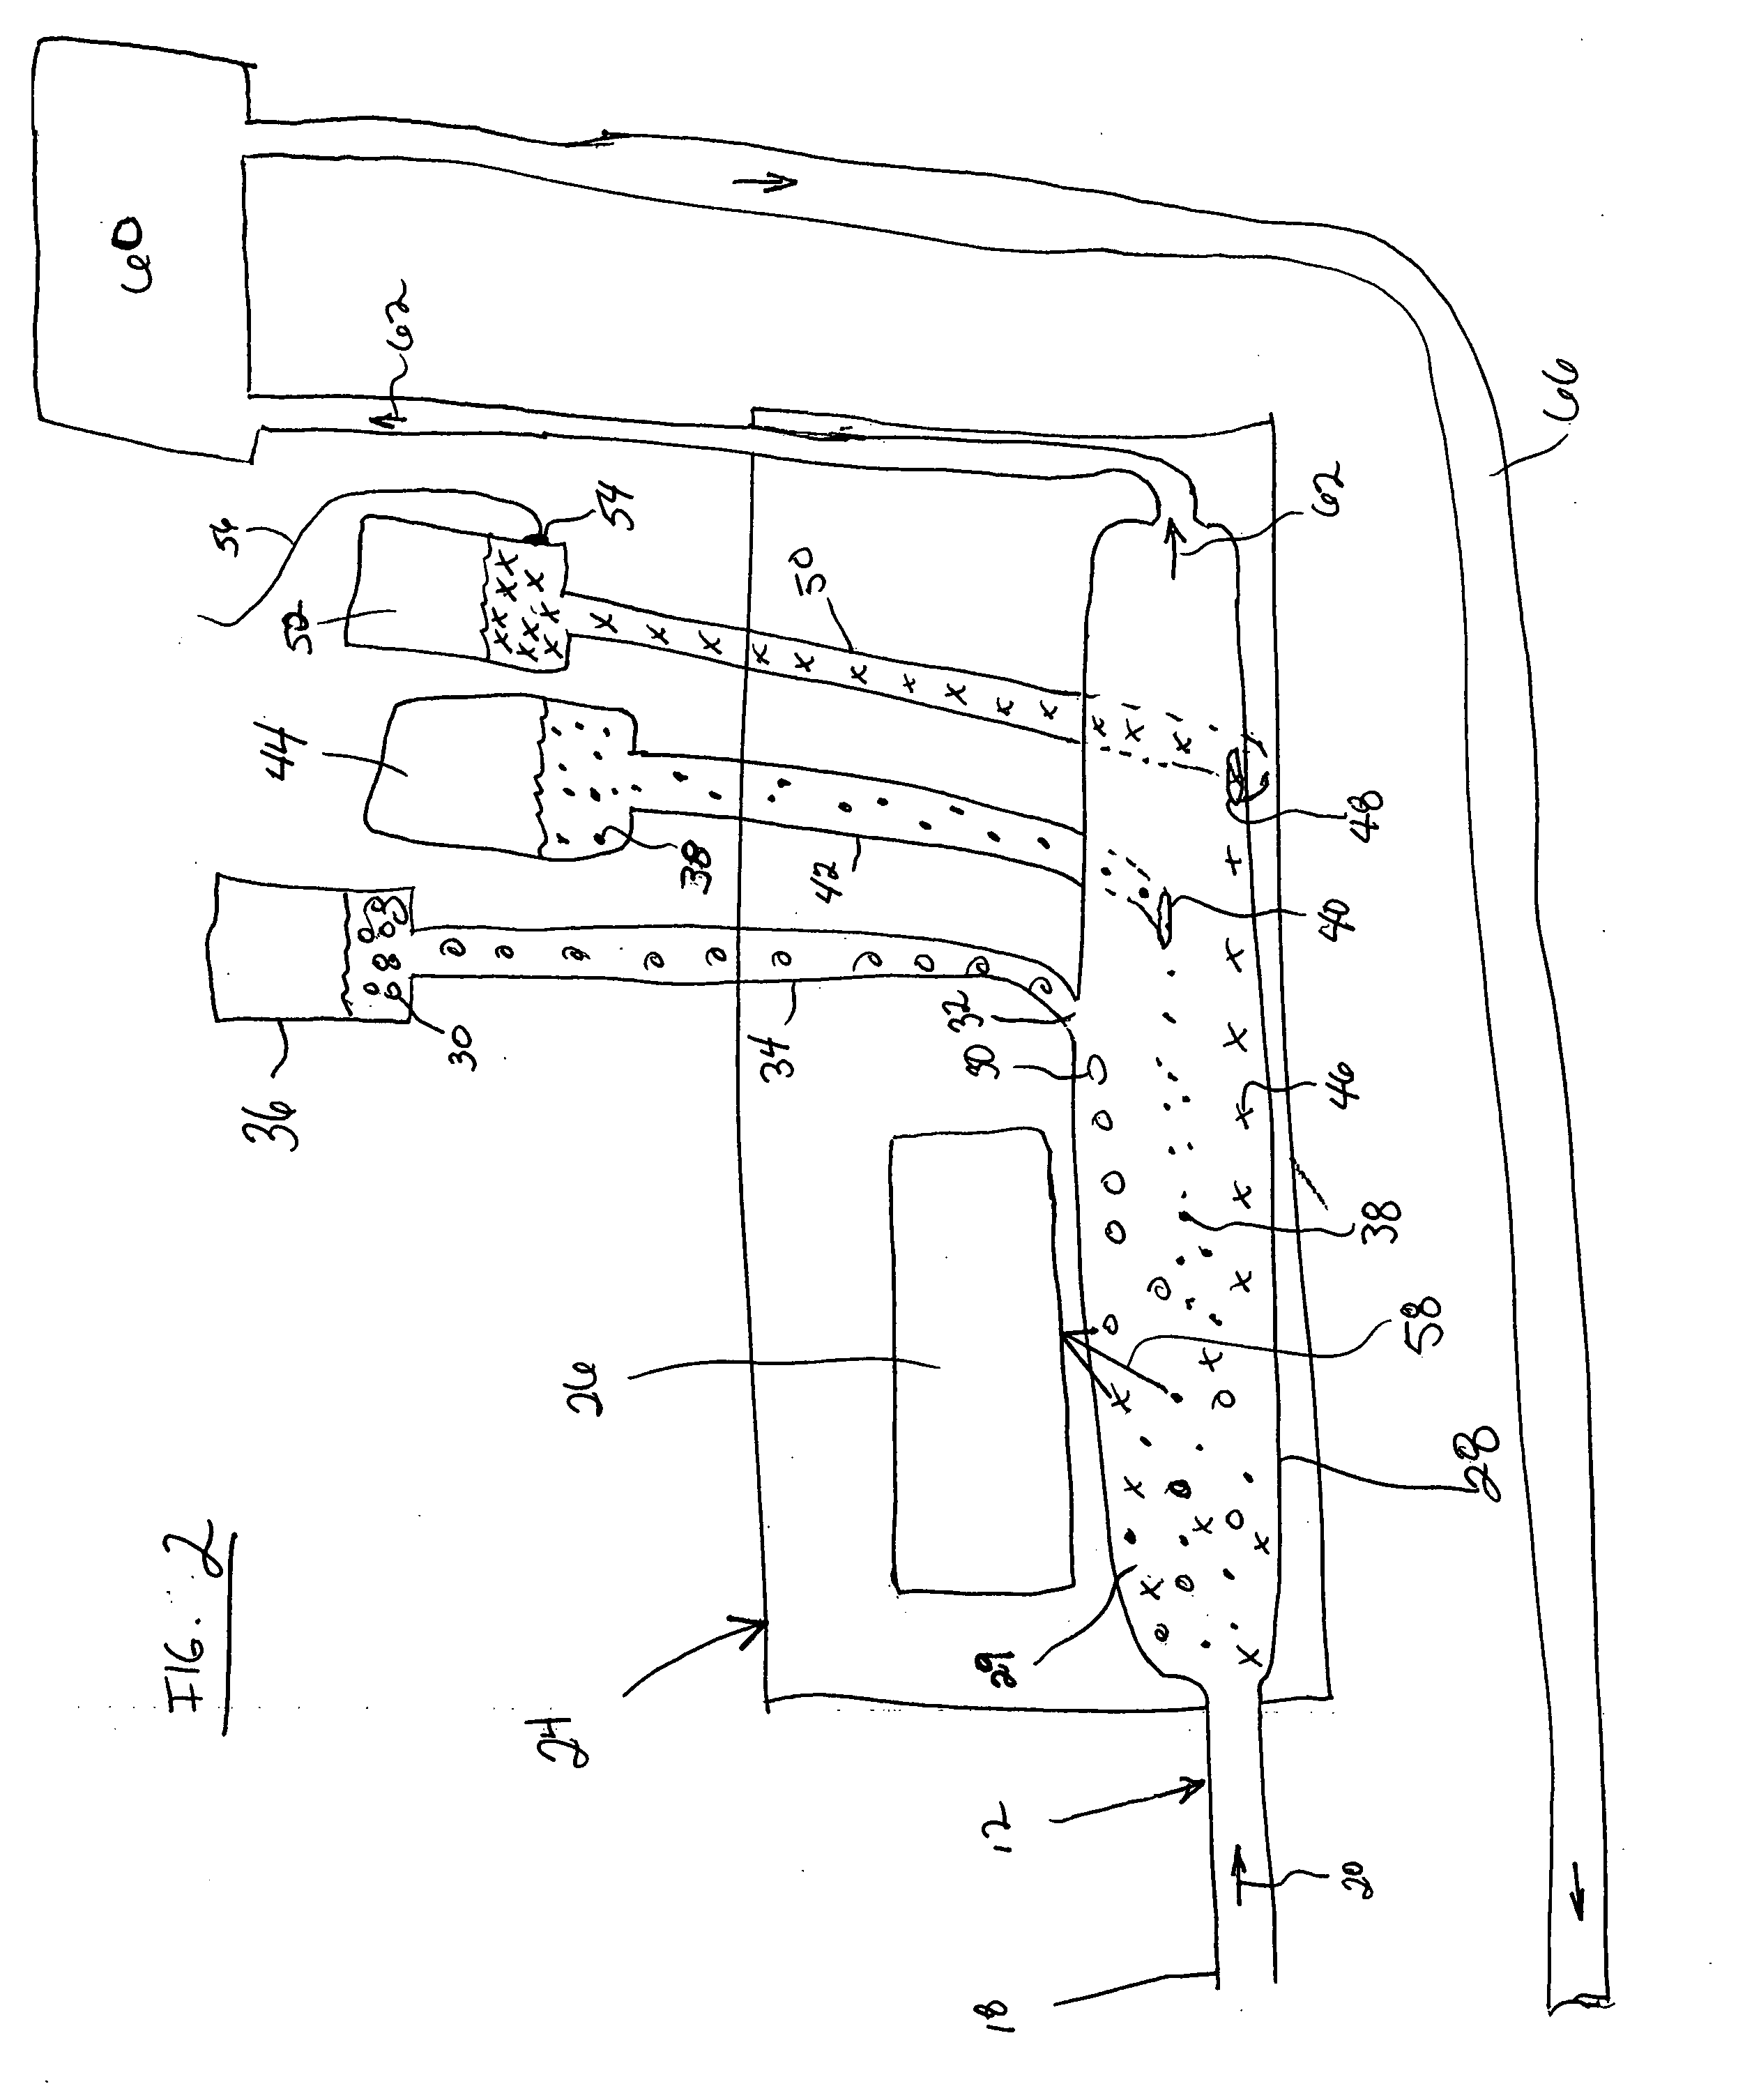 Blood component separation system with stationary separation chamber